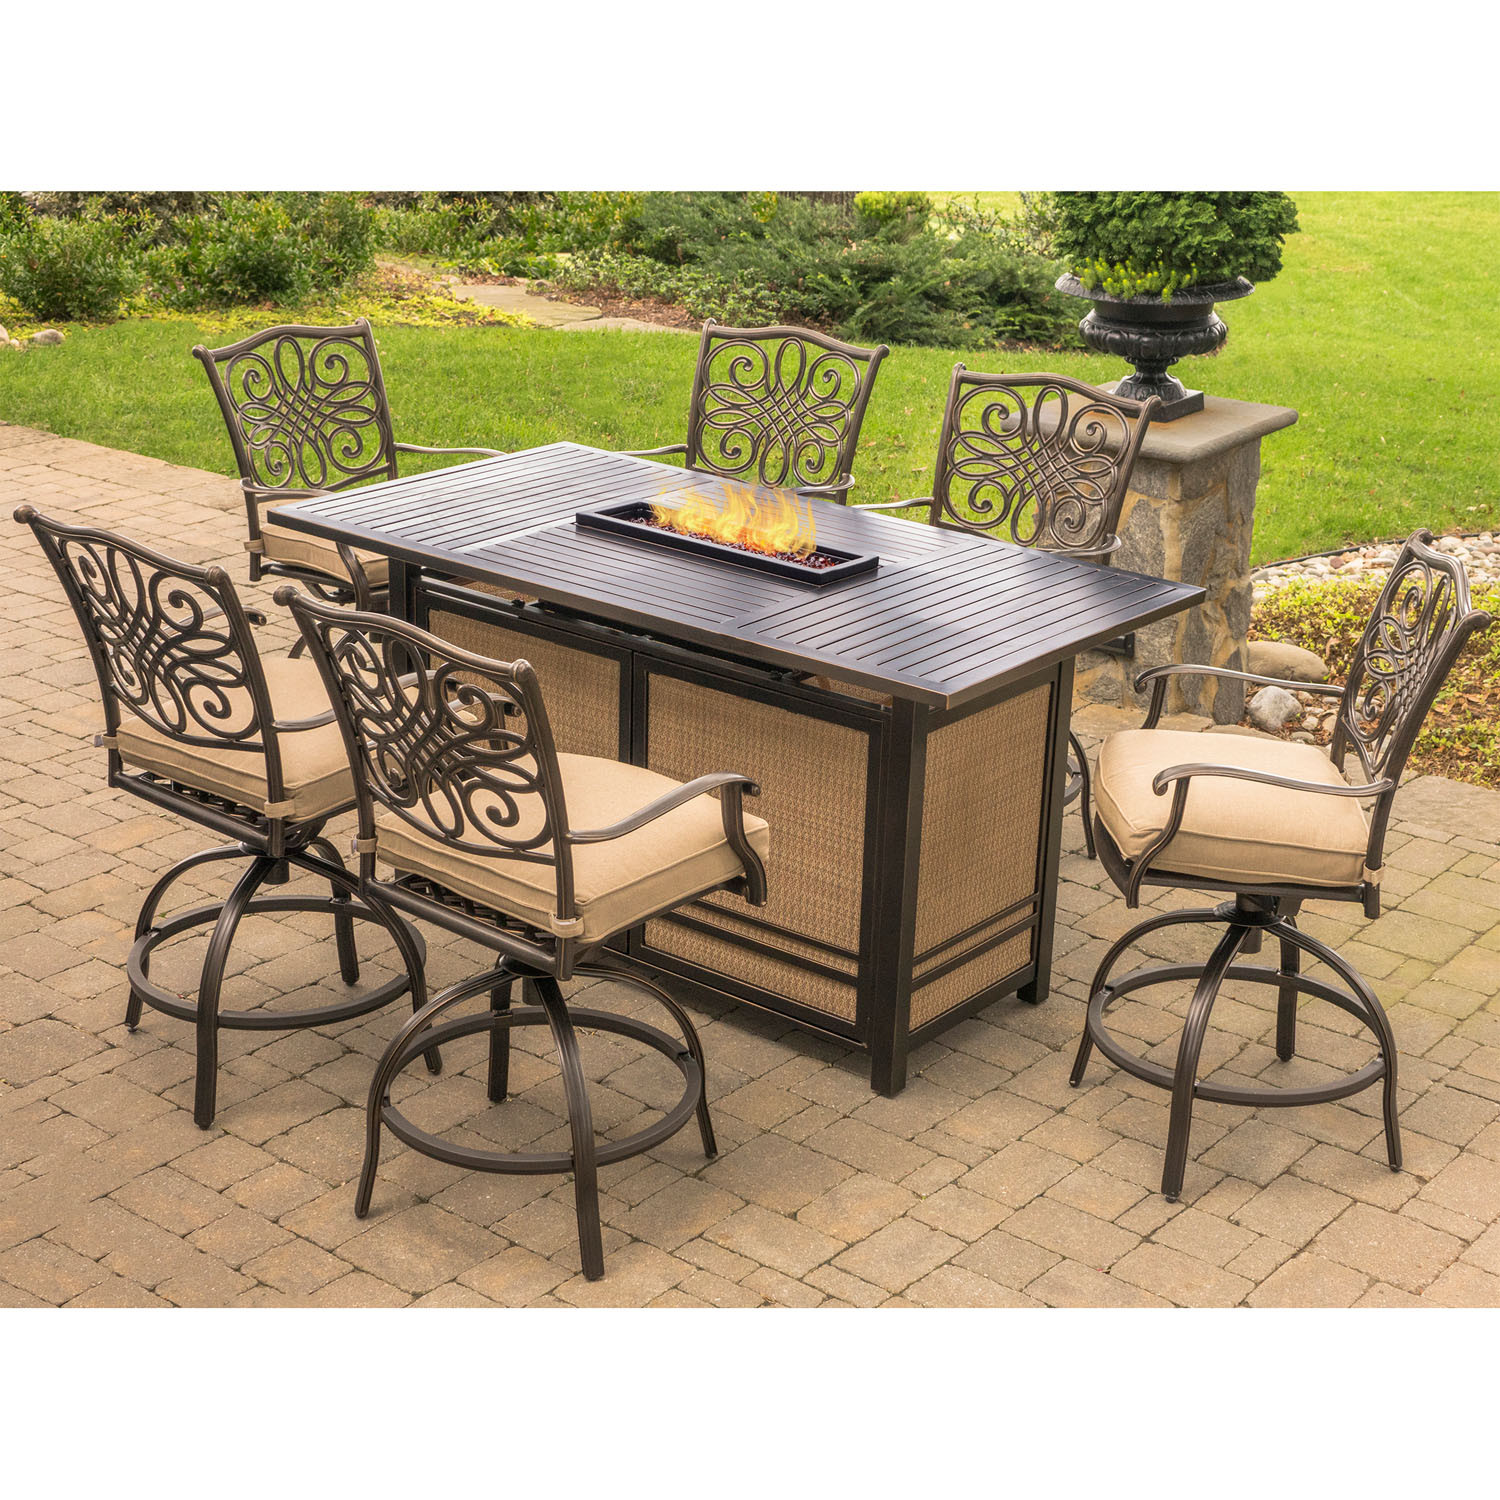 Propane Fire Pit Table Set
 Hanover Traditions 7 Piece High Dining Set in Tan with